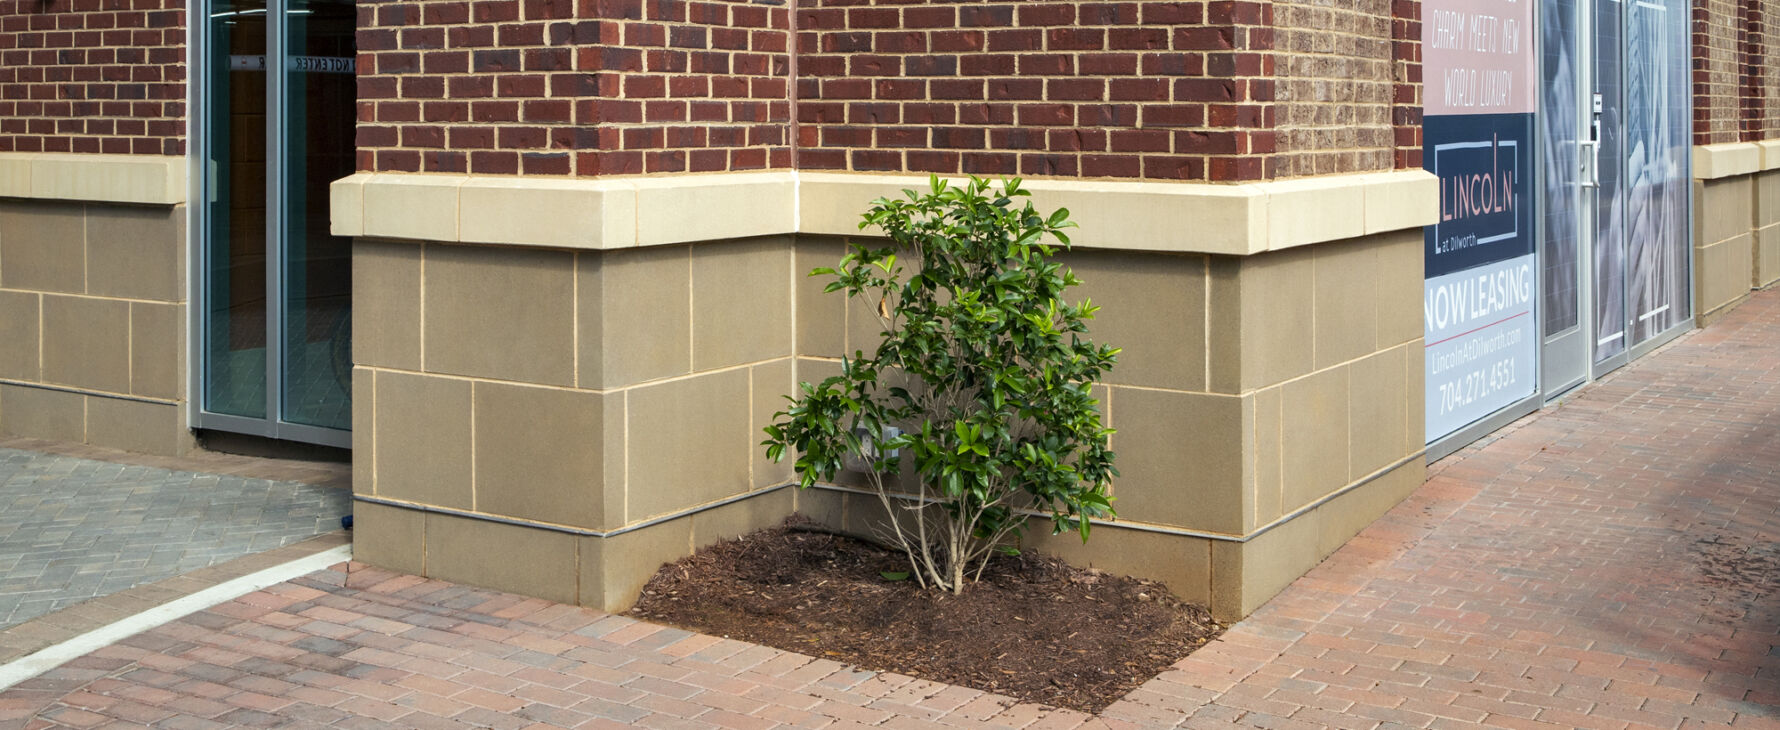 The Lincoln at Dilworth in Charlotte, NC featuring Prestige Cast Stone - Smooth Face in Basalt